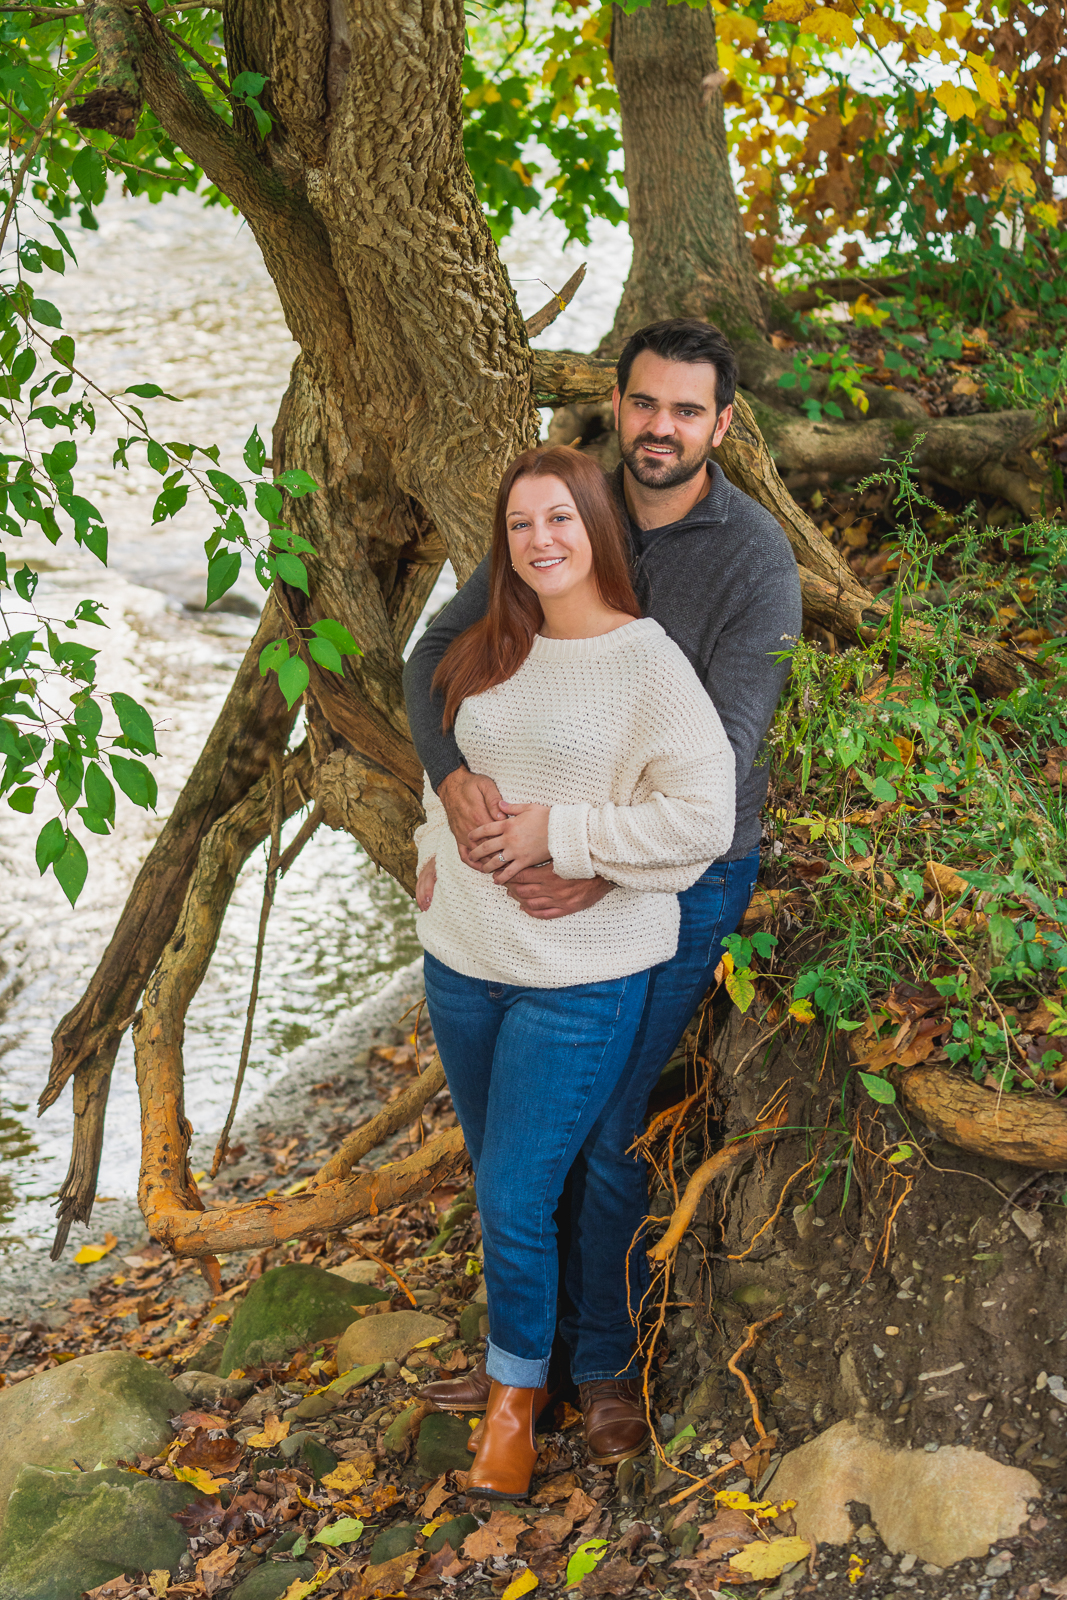 Man and woman fiancee engagement photo, couple portrait, creek, nature, fall leaves, fall colors, cute, smile, outdoor fall engagement photo session at Tinkers Creek, Bedford Reservation, Cleveland Metroparks